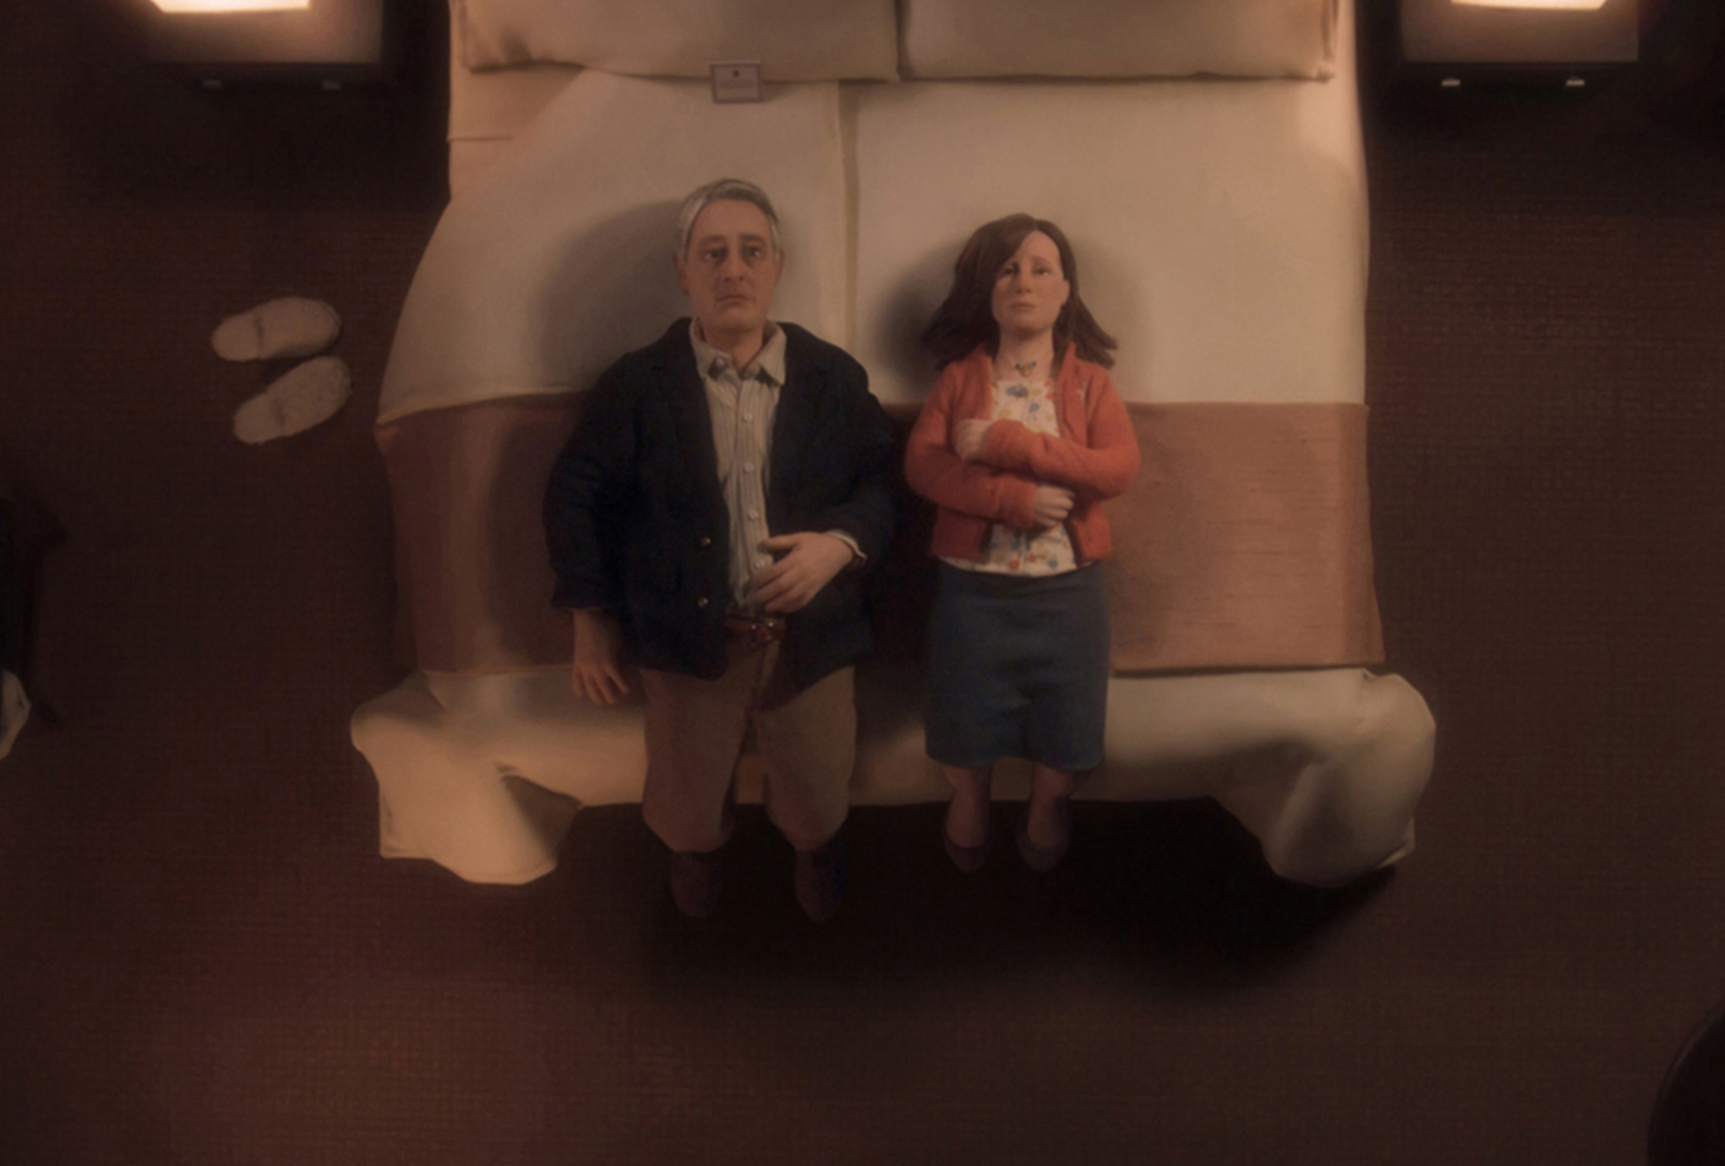 anomalisa-movie-written-and-directed-by-charlie-kaufman-is-mysogynistic